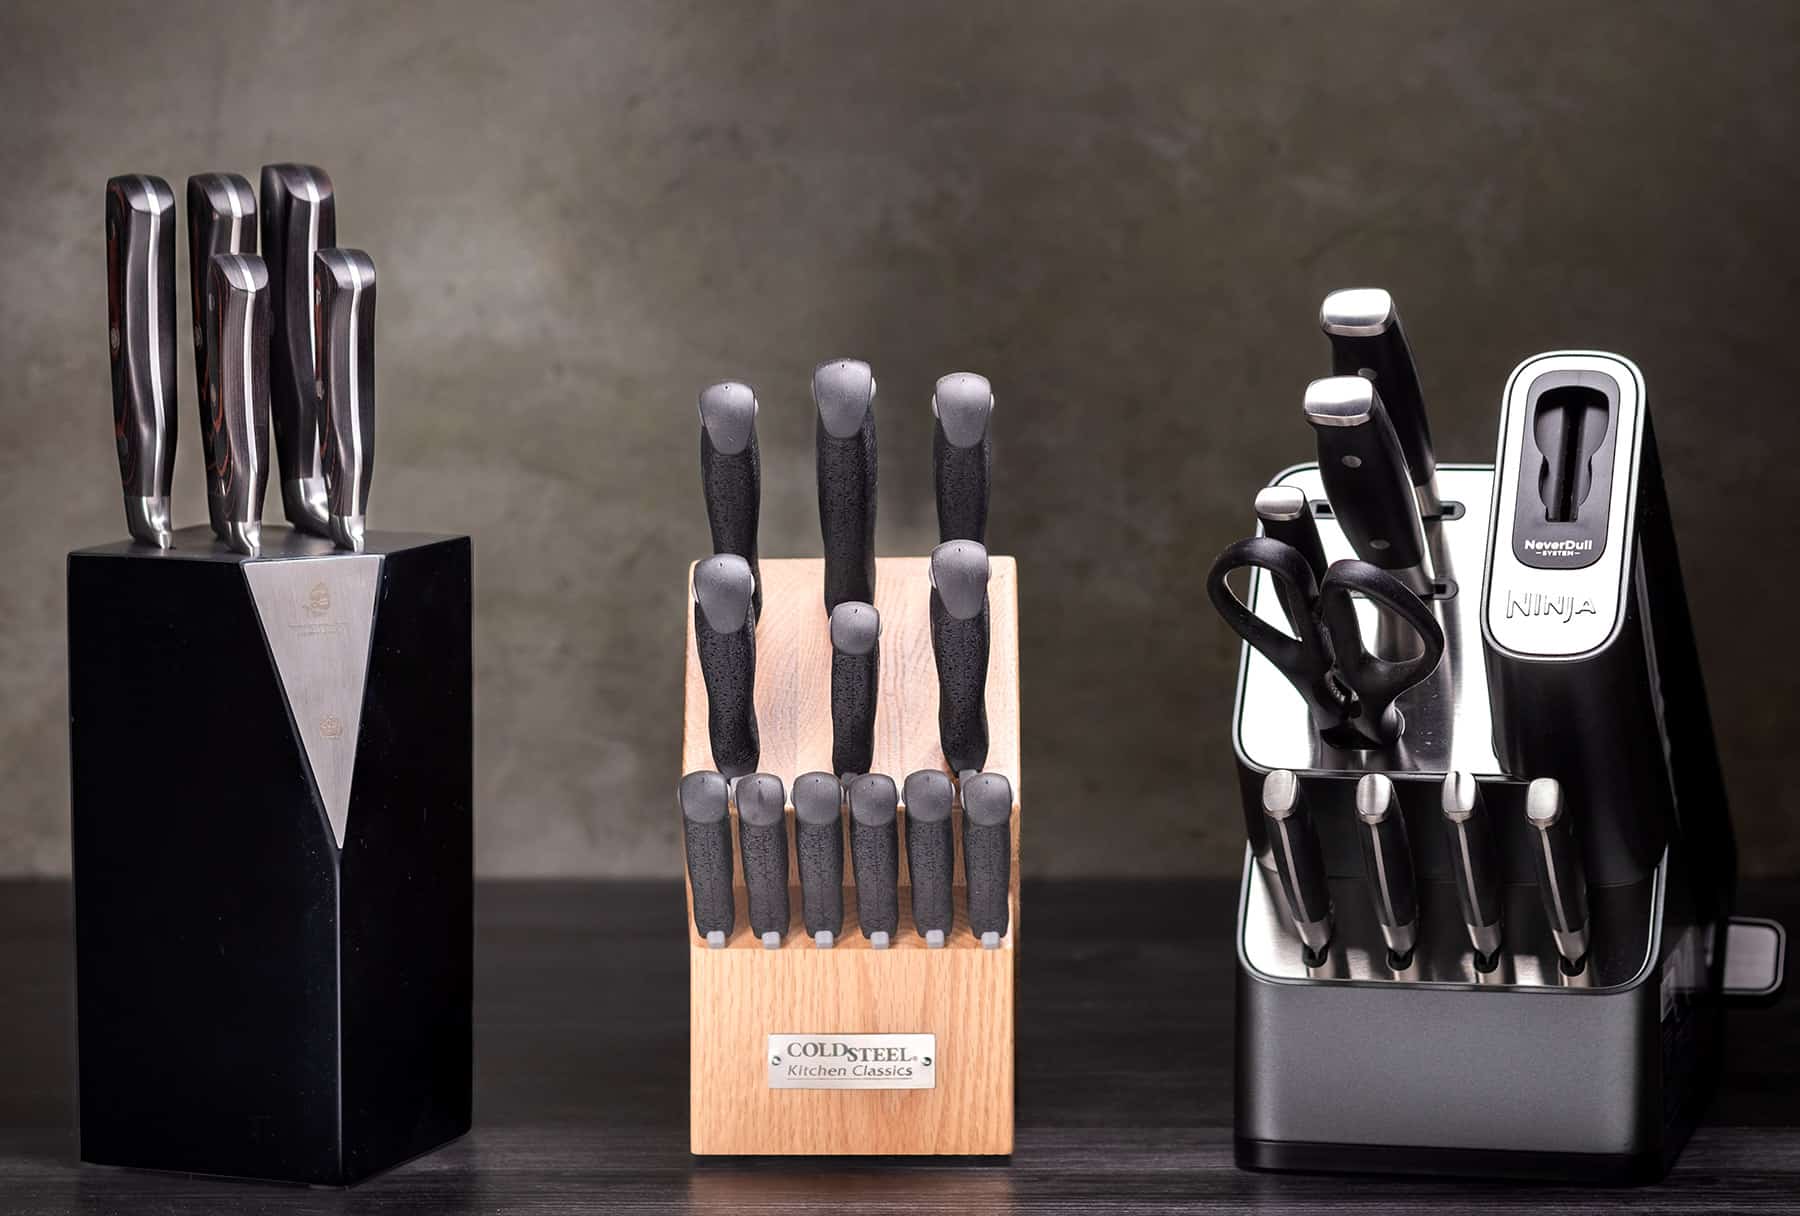 Good kitchen knife sets under $200 need to have decent edge retention, excellent corrosion resistance and comfortable handles.